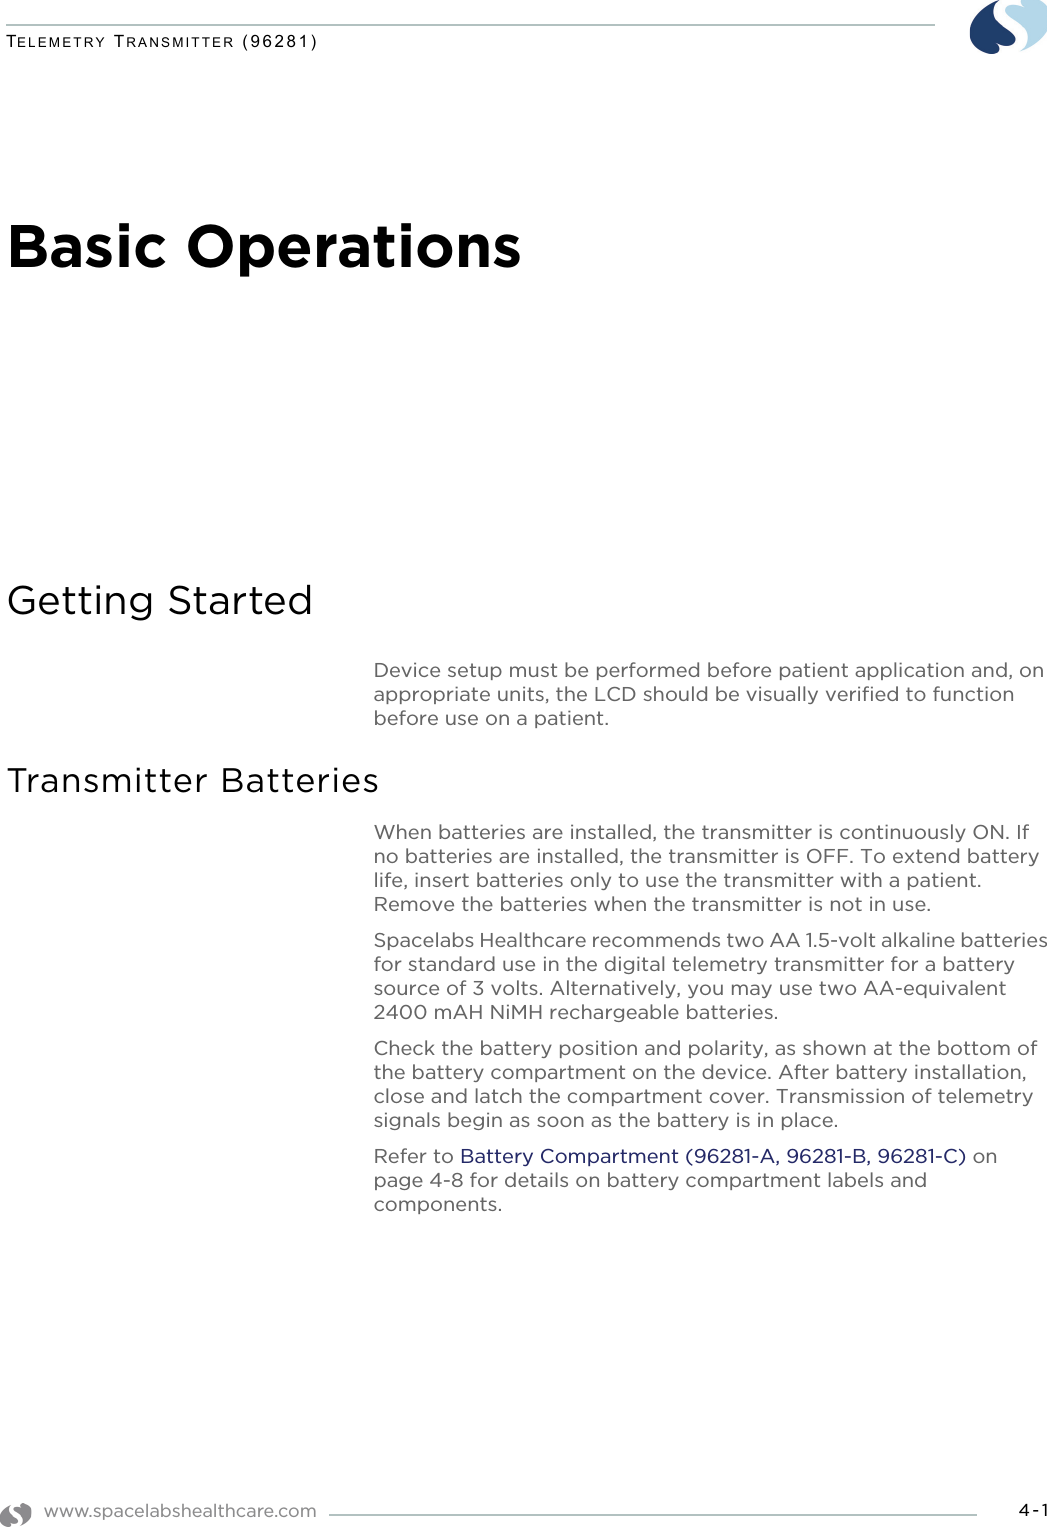 www.spacelabshealthcare.com 4-1TELEMETRY TRANSMITTER (96281)Basic OperationsGetting StartedDevice setup must be performed before patient application and, on appropriate units, the LCD should be visually verified to function before use on a patient.Transmitter BatteriesWhen batteries are installed, the transmitter is continuously ON. If no batteries are installed, the transmitter is OFF. To extend battery life, insert batteries only to use the transmitter with a patient. Remove the batteries when the transmitter is not in use. Spacelabs Healthcare recommends two AA 1.5-volt alkaline batteries for standard use in the digital telemetry transmitter for a battery source of 3 volts. Alternatively, you may use two AA-equivalent 2400 mAH NiMH rechargeable batteries.Check the battery position and polarity, as shown at the bottom of the battery compartment on the device. After battery installation, close and latch the compartment cover. Transmission of telemetry signals begin as soon as the battery is in place.Refer to Battery Compartment (96281-A, 96281-B, 96281-C) on page 4-8 for details on battery compartment labels and components.